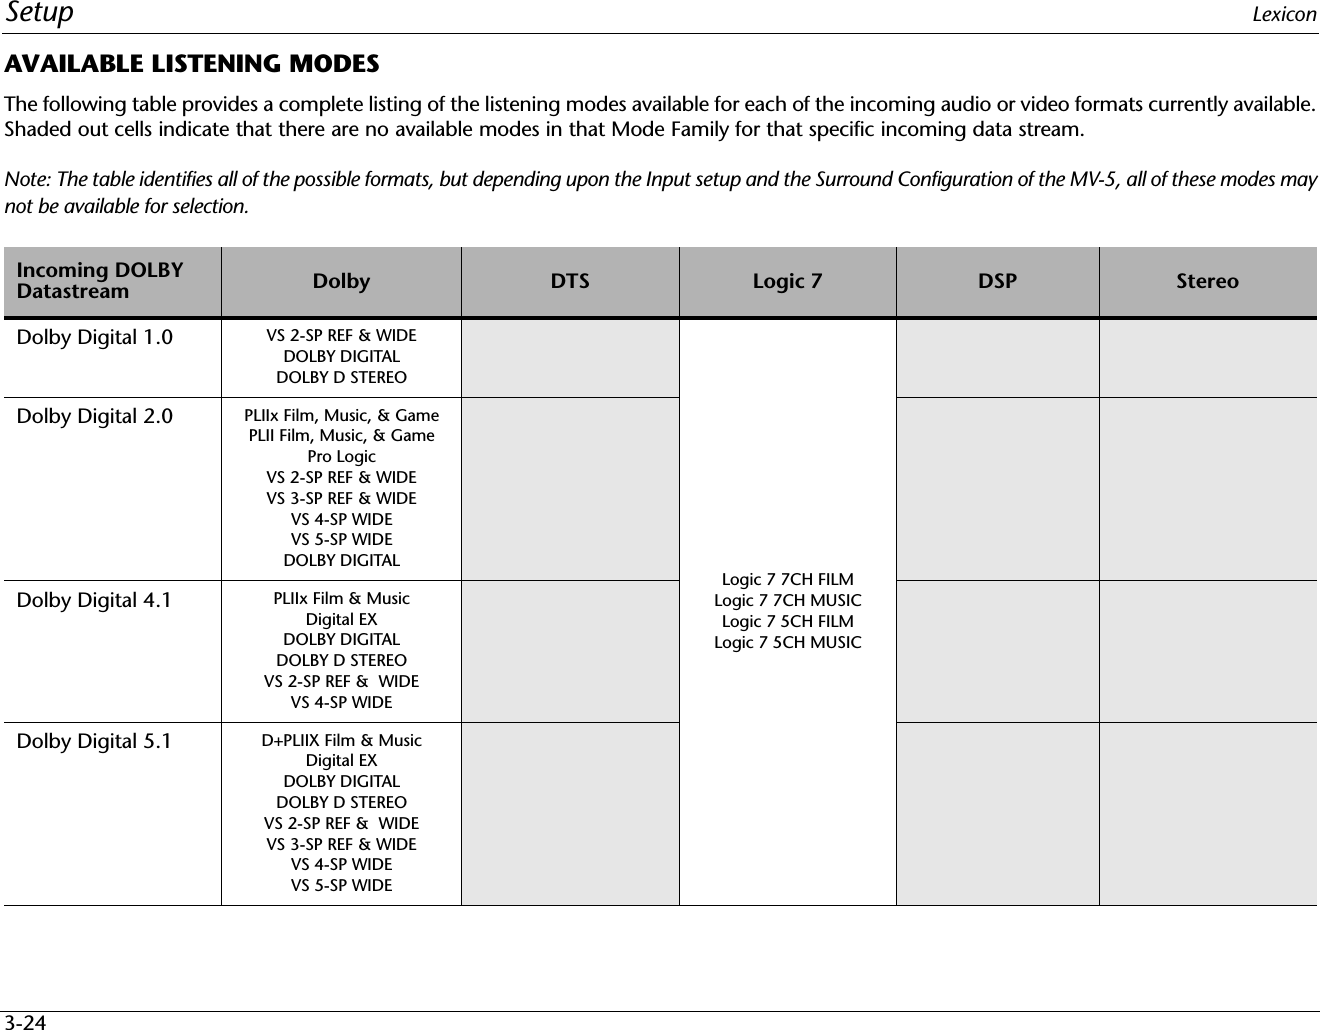 Setup Lexicon3-24AVAILABLE LISTENING MODESThe following table provides a complete listing of the listening modes available for each of the incoming audio or video formats currently available.Shaded out cells indicate that there are no available modes in that Mode Family for that specific incoming data stream.Note: The table identifies all of the possible formats, but depending upon the Input setup and the Surround Configuration of the MV-5, all of these modes maynot be available for selection.Incoming DOLBY Datastream Dolby DTS Logic 7 DSP StereoDolby Digital 1.0 VS 2-SP REF &amp; WIDEDOLBY DIGITALDOLBY D STEREOLogic 7 7CH FILMLogic 7 7CH MUSICLogic 7 5CH FILMLogic 7 5CH MUSICDolby Digital 2.0 PLIIx Film, Music, &amp; Game PLII Film, Music, &amp; GamePro LogicVS 2-SP REF &amp; WIDEVS 3-SP REF &amp; WIDEVS 4-SP WIDEVS 5-SP WIDEDOLBY DIGITALDolby Digital 4.1 PLIIx Film &amp; MusicDigital EXDOLBY DIGITALDOLBY D STEREOVS 2-SP REF &amp;  WIDEVS 4-SP WIDEDolby Digital 5.1 D+PLIIX Film &amp; MusicDigital EXDOLBY DIGITALDOLBY D STEREOVS 2-SP REF &amp;  WIDEVS 3-SP REF &amp; WIDEVS 4-SP WIDEVS 5-SP WIDE